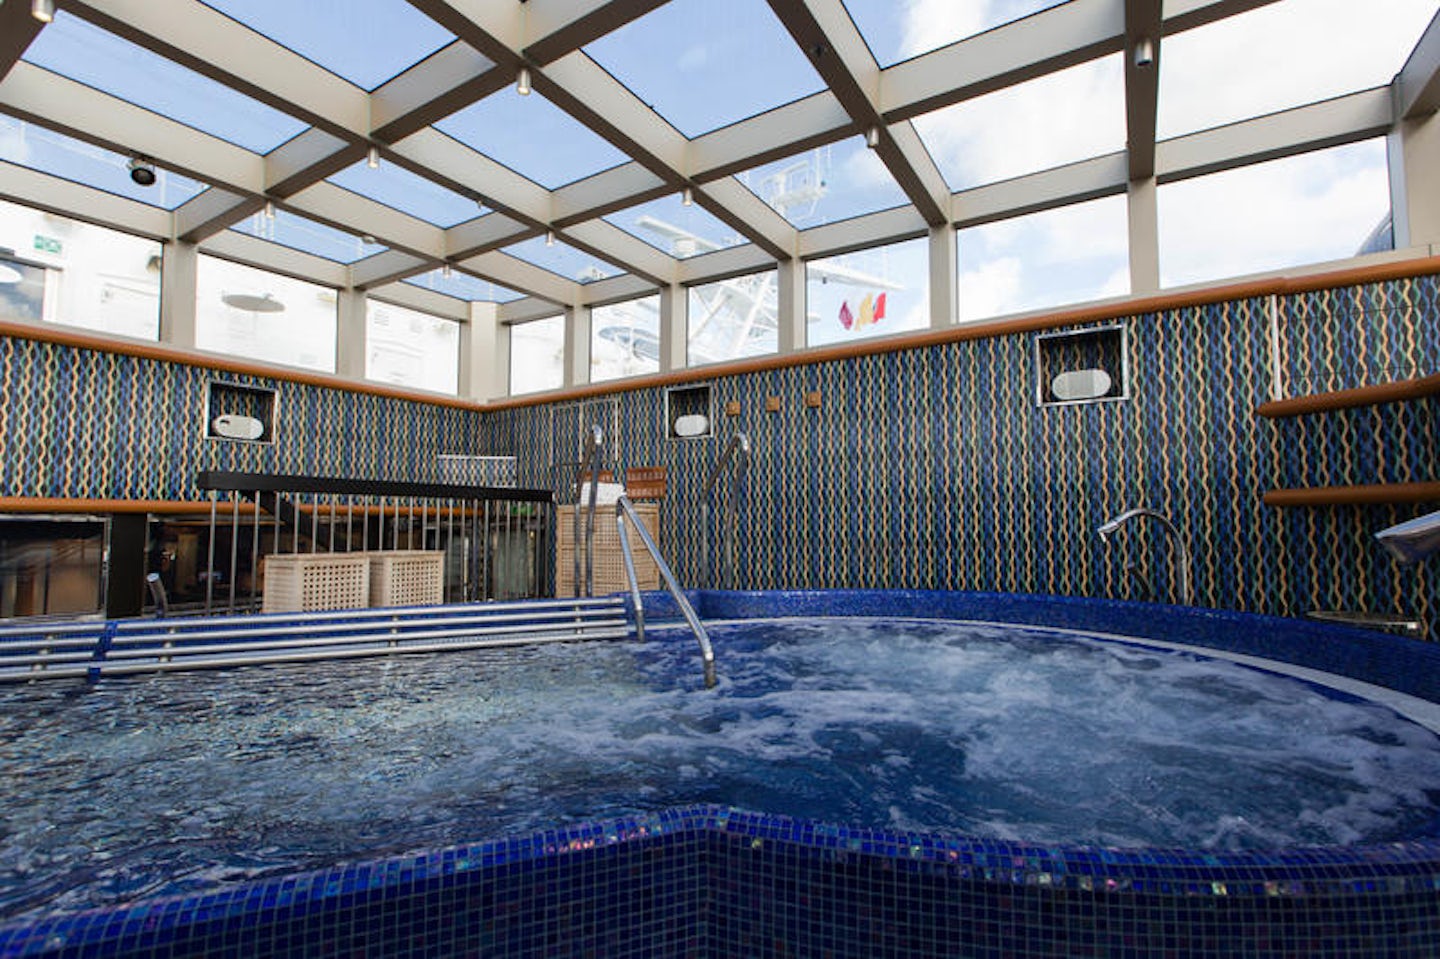 The Cloud 9 Spa Thalassotherapy Pool on Carnival Magic